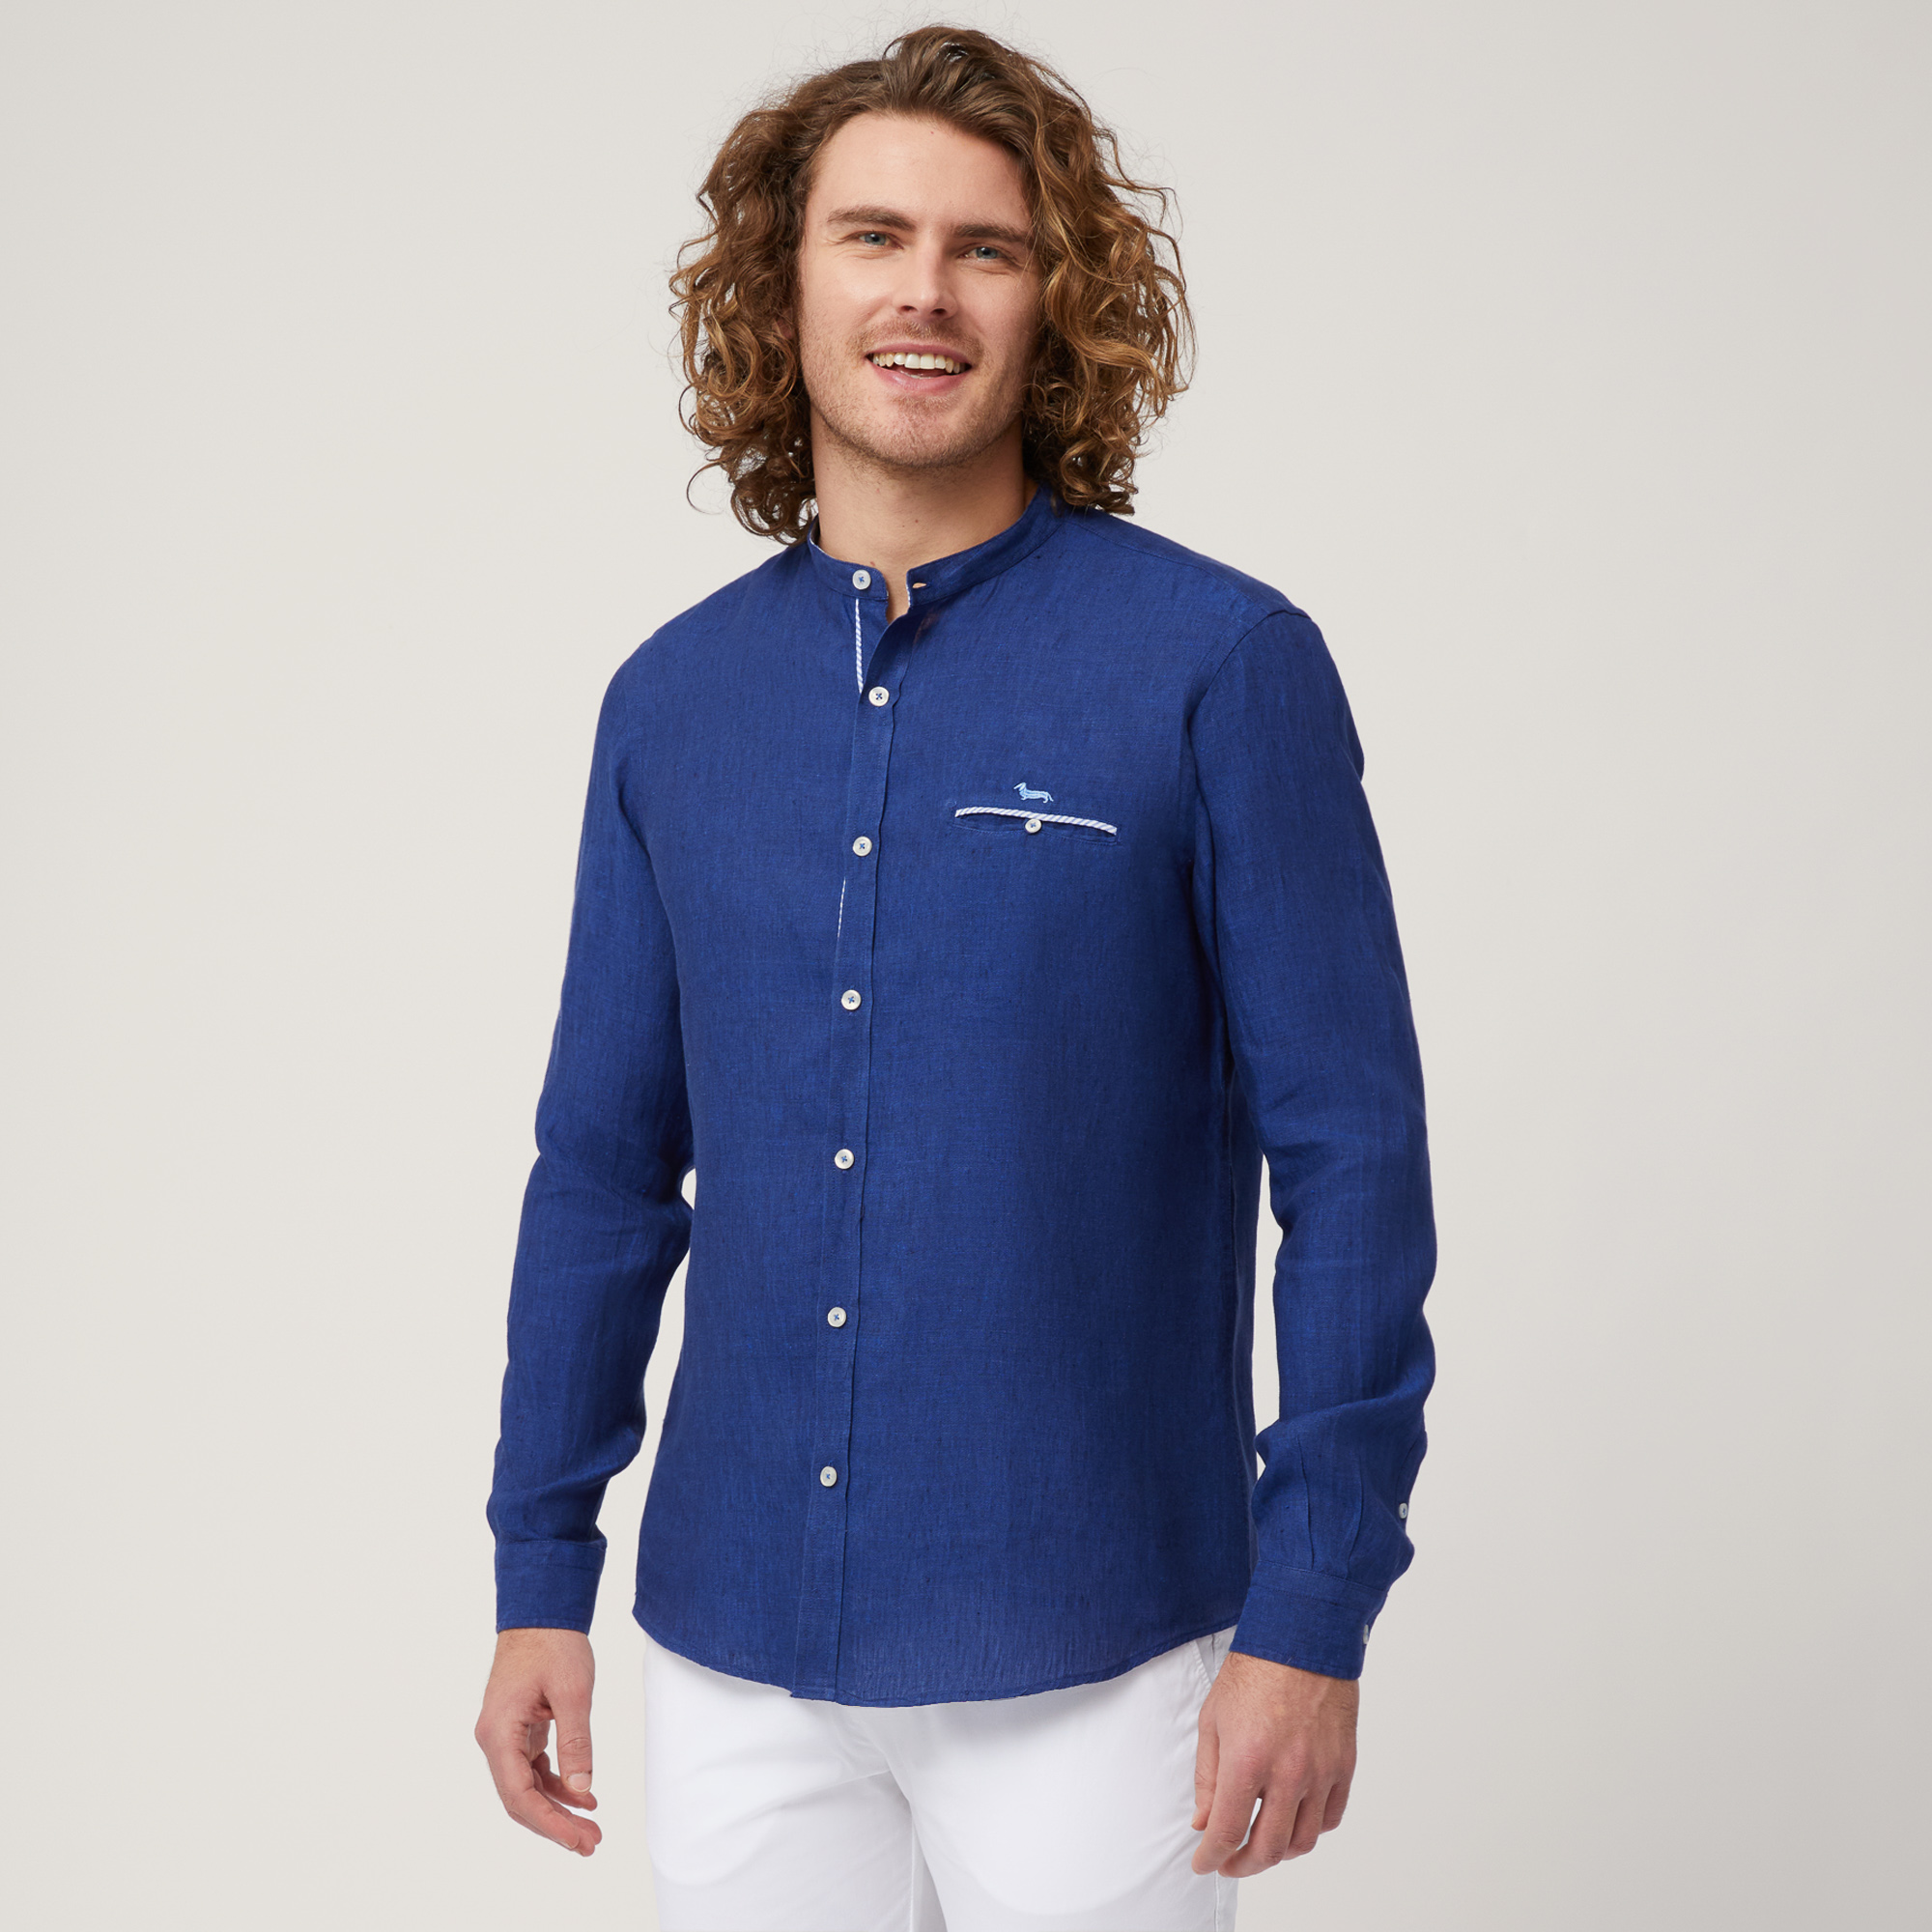 Linen Shirt with Mandarin Collar and Breast Pocket, Blue, large